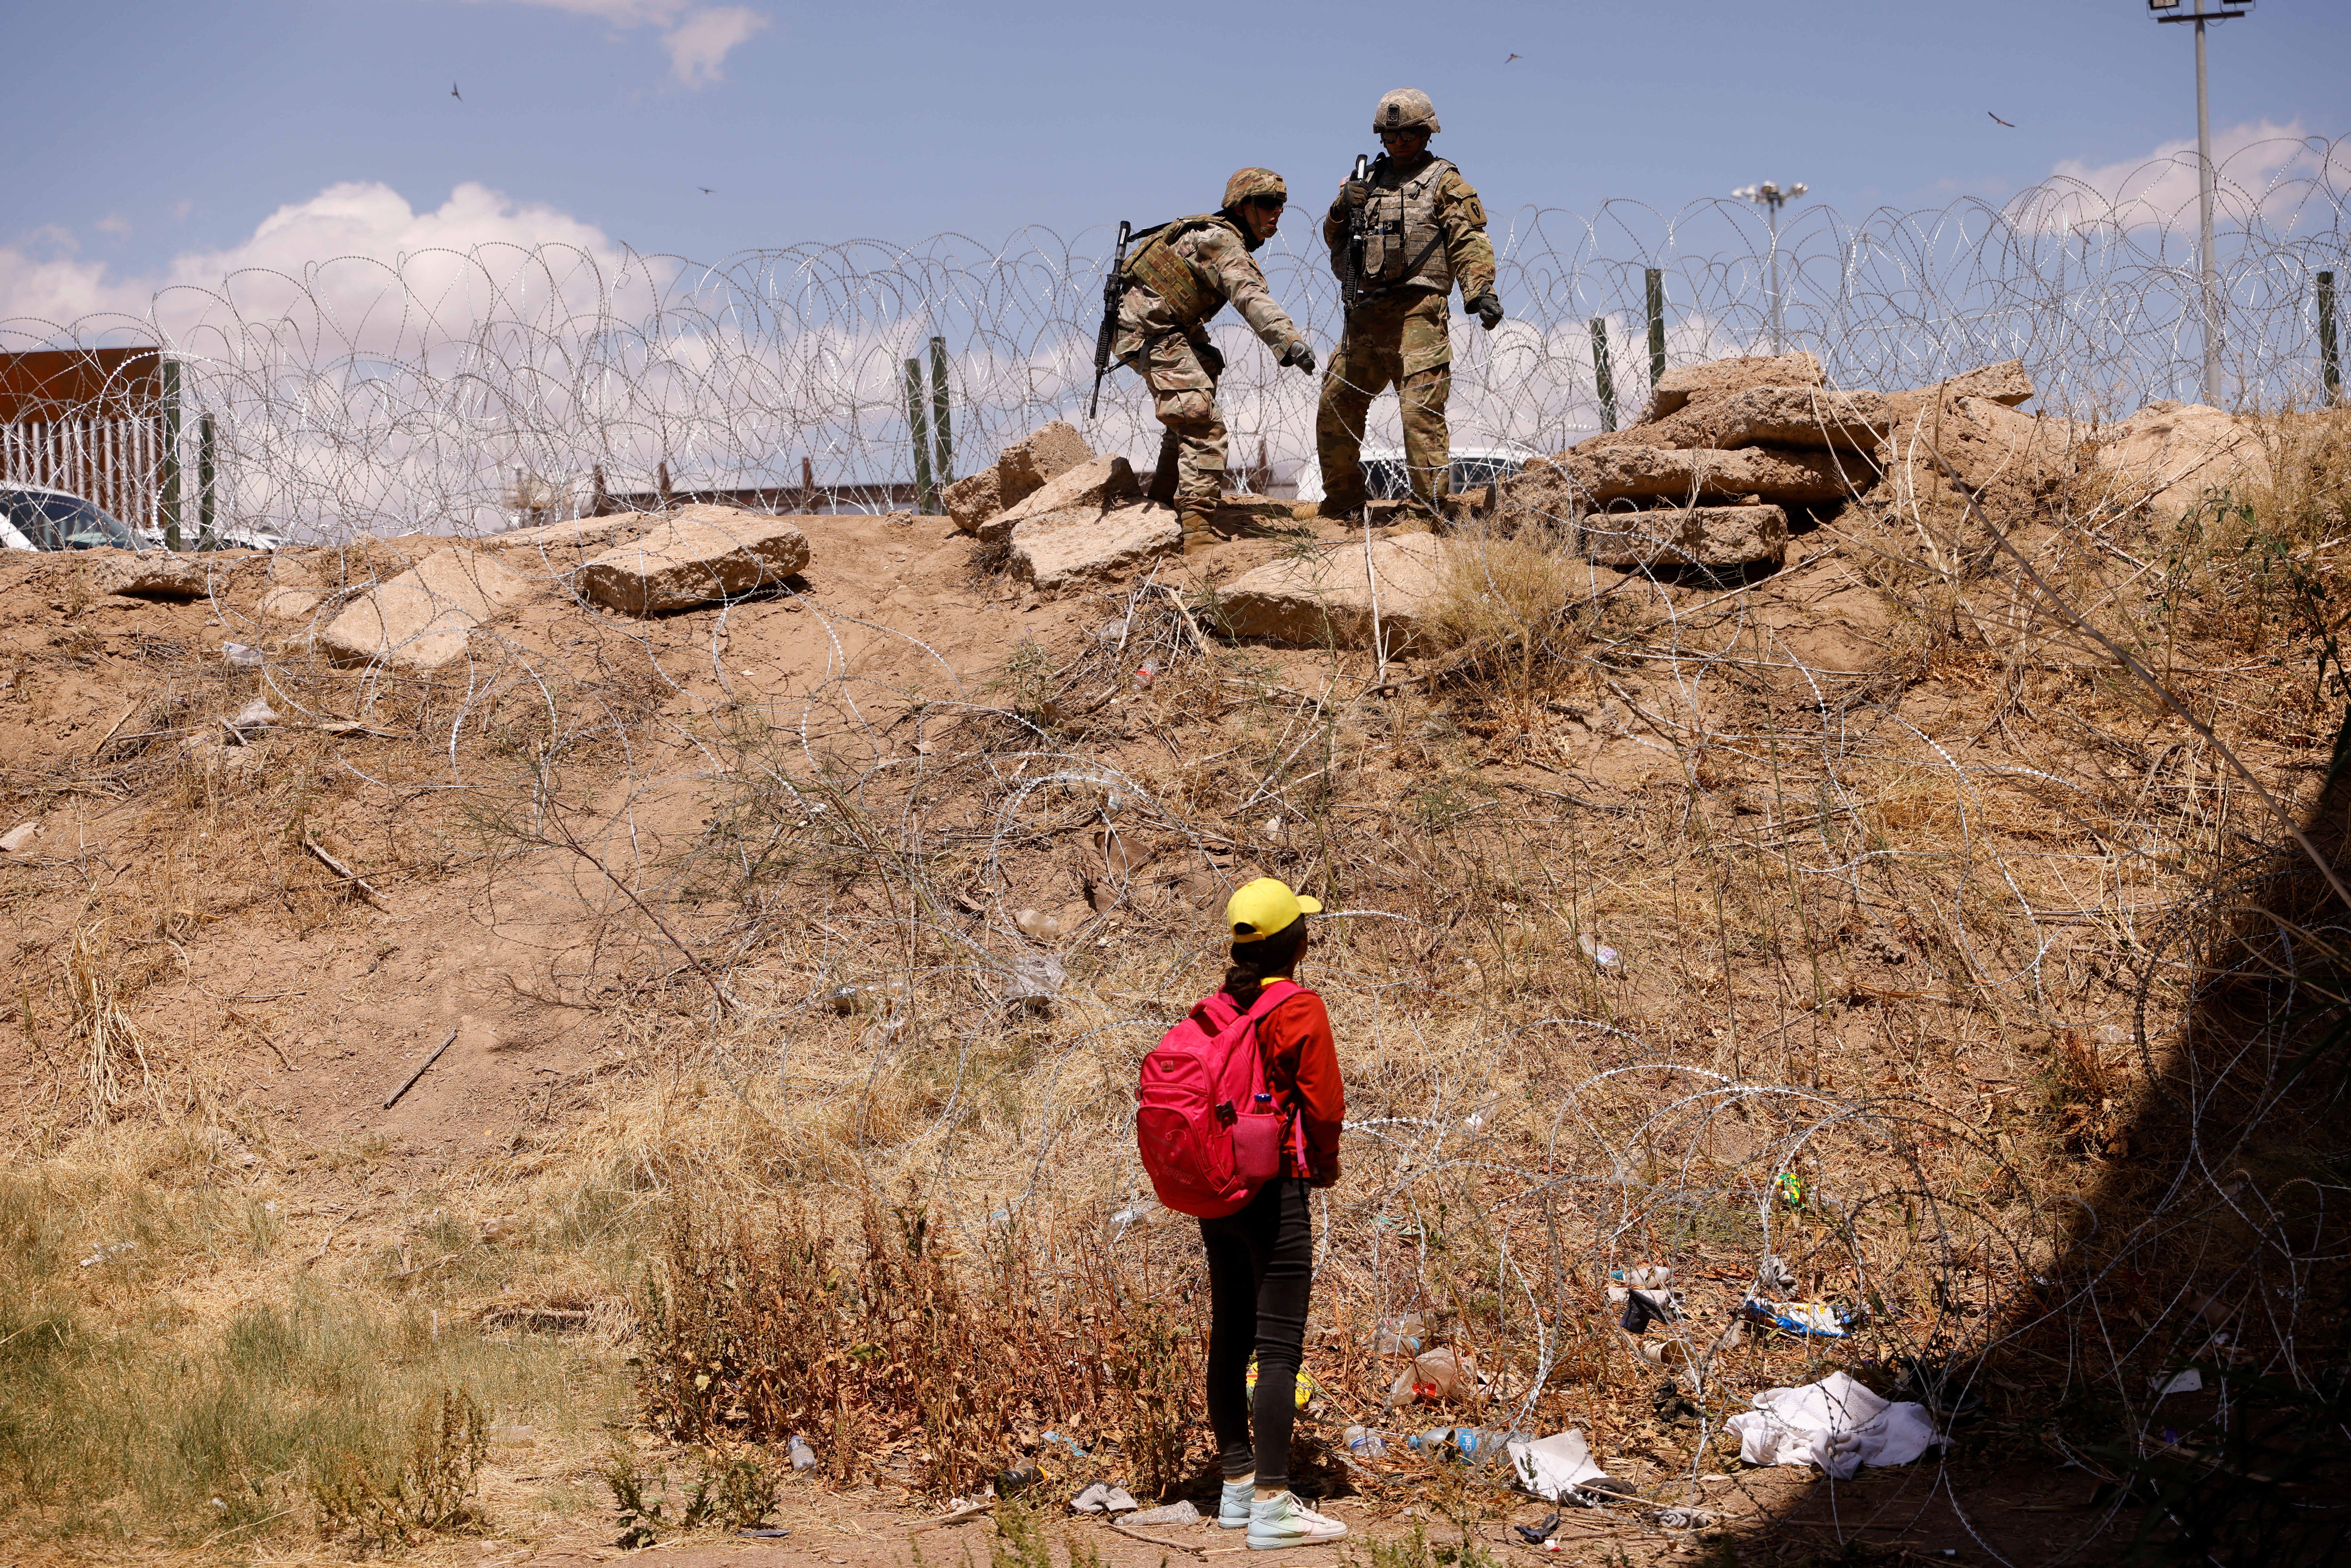 Migrants stand near the Rio Bravo river after crossing the border, to request asylum in the United States, as seen from Ciudad Juarez